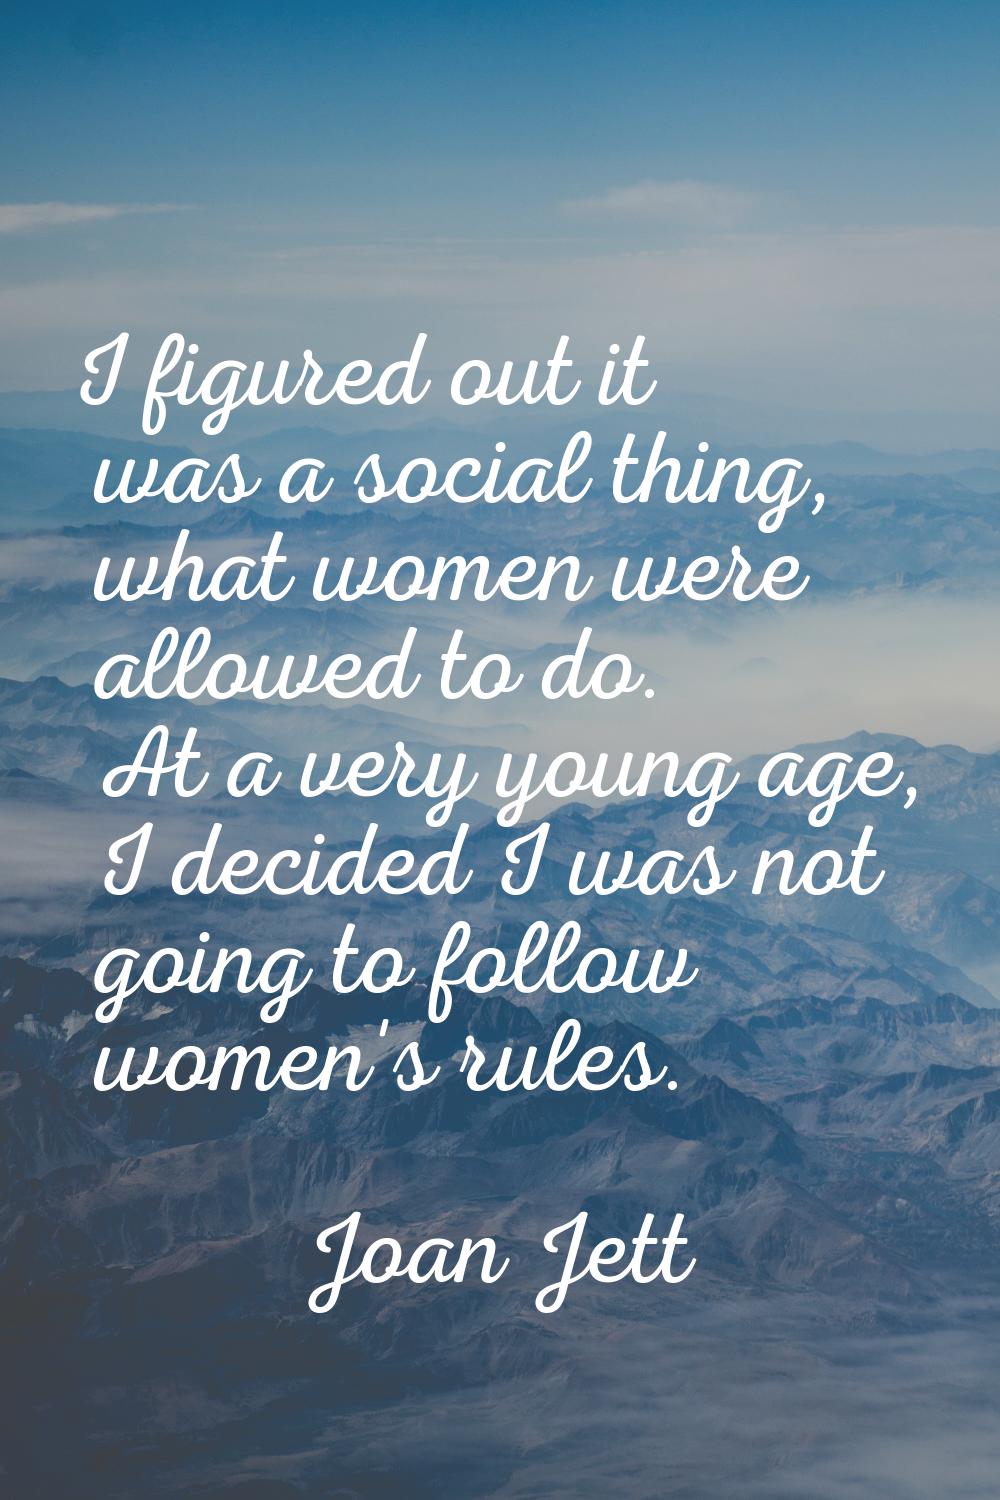 I figured out it was a social thing, what women were allowed to do. At a very young age, I decided 